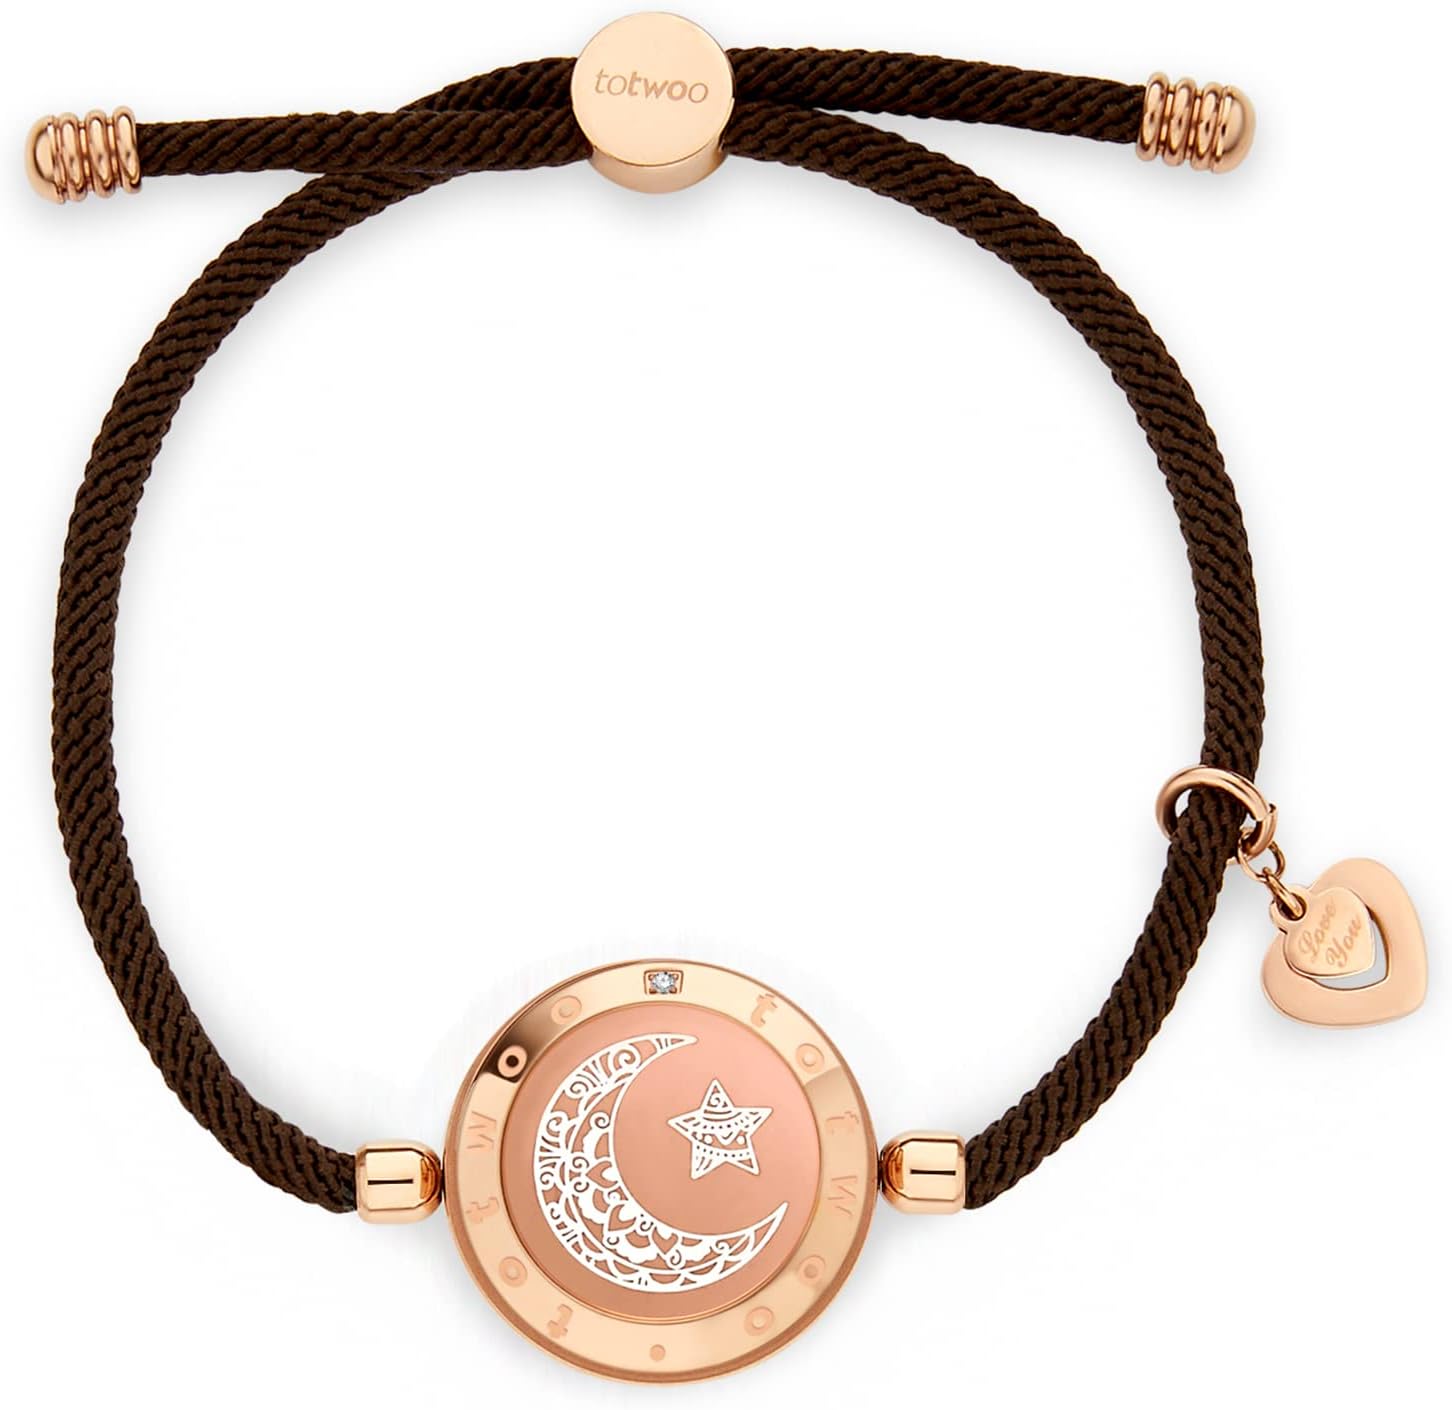 Discovering the Elegance: The Totwoo Smart Jewelry Bracelet缩略图